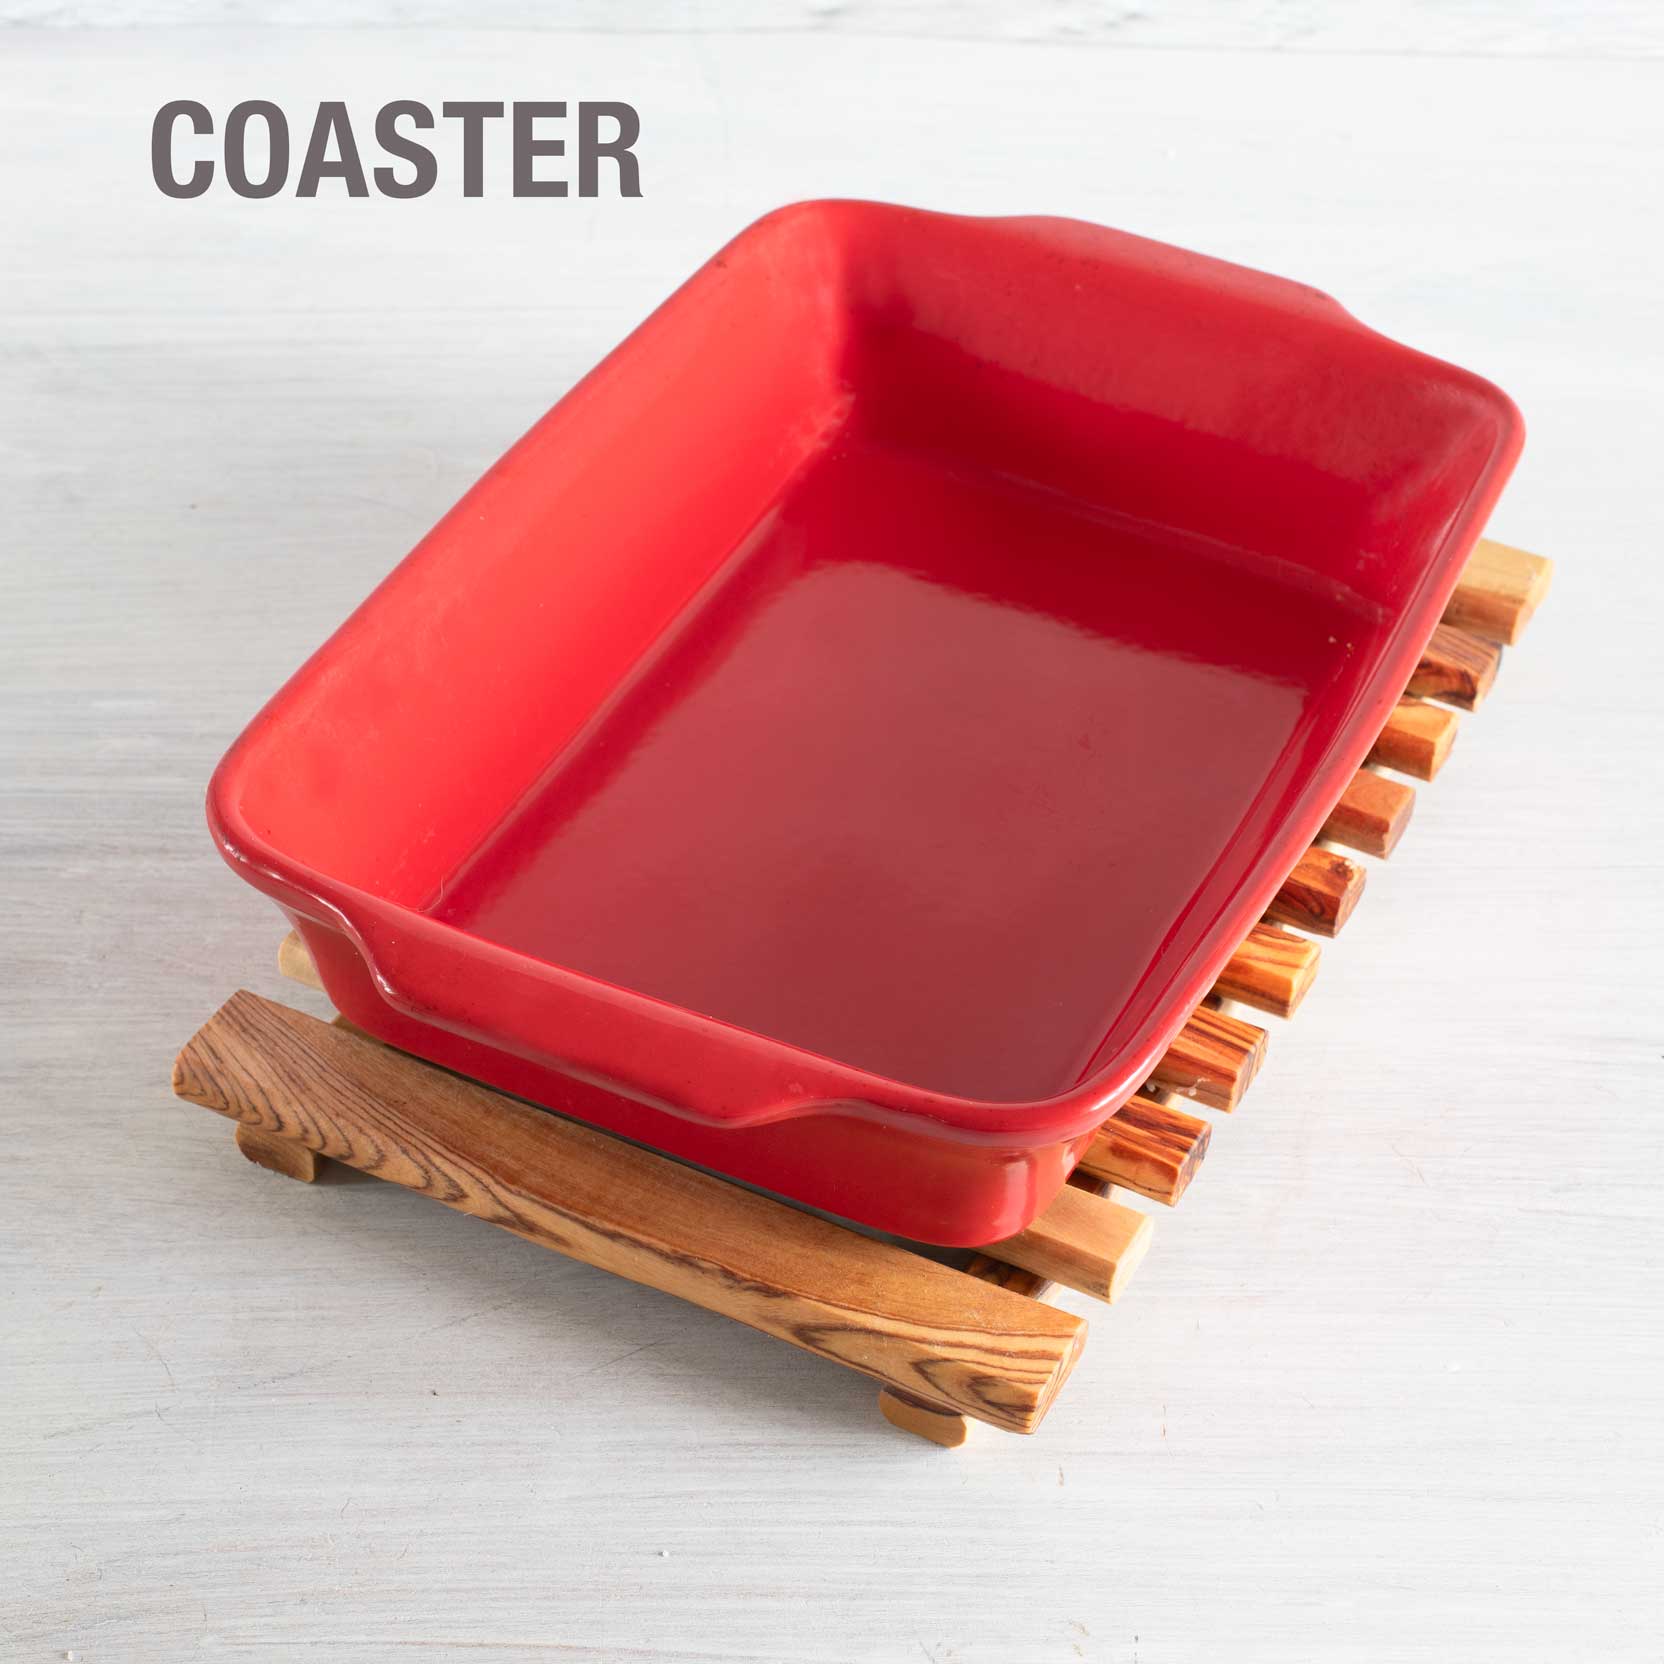 GROSSETO Multifunctional Bread Cutting Coaster Tray OLIVE WOOD HANDCRAFTED FREE ENGRAVING - Jamailah